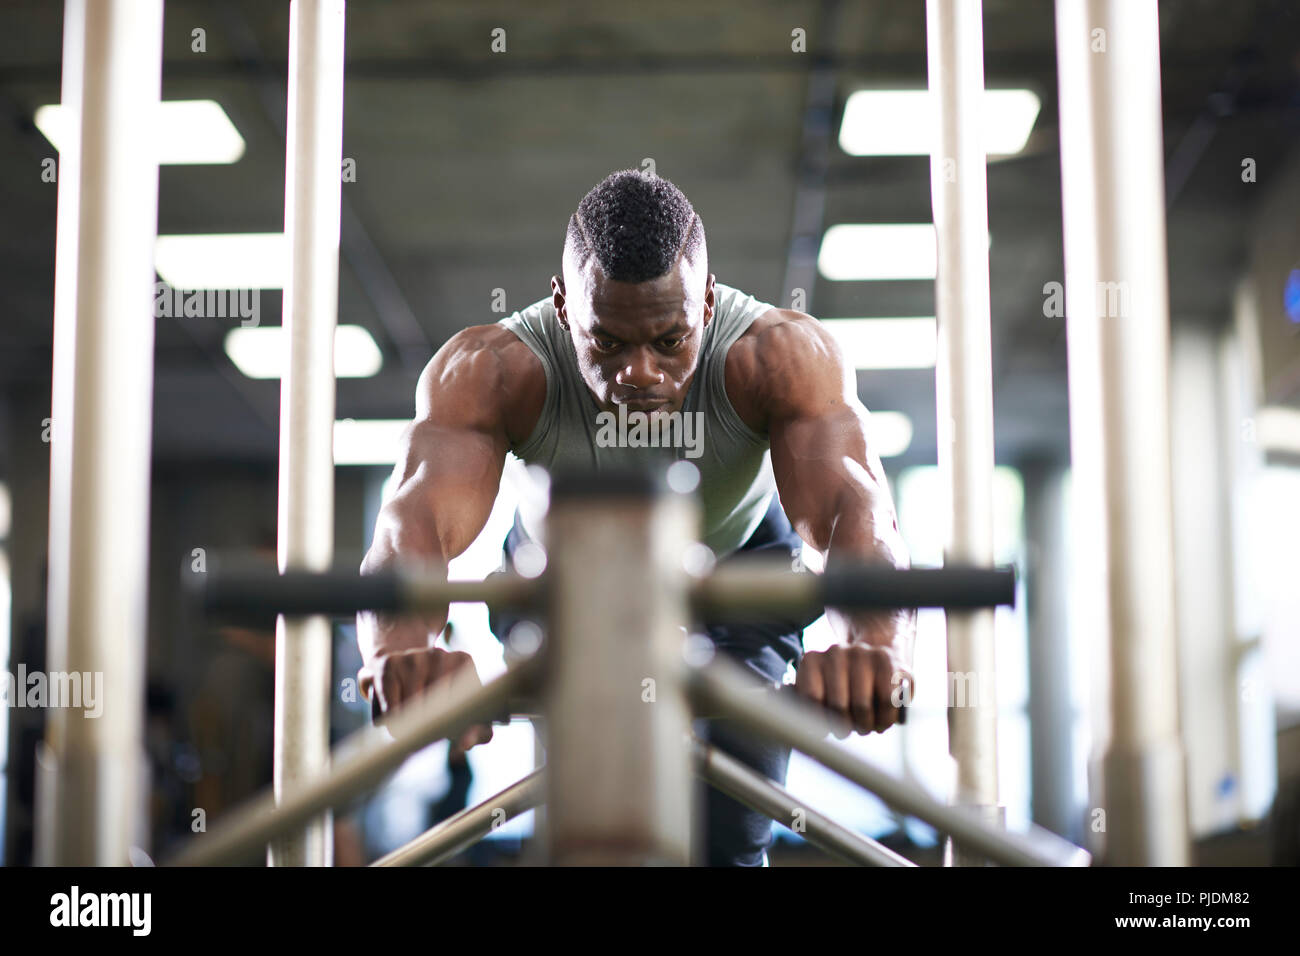 Man doing sled training in gym Stock Photo